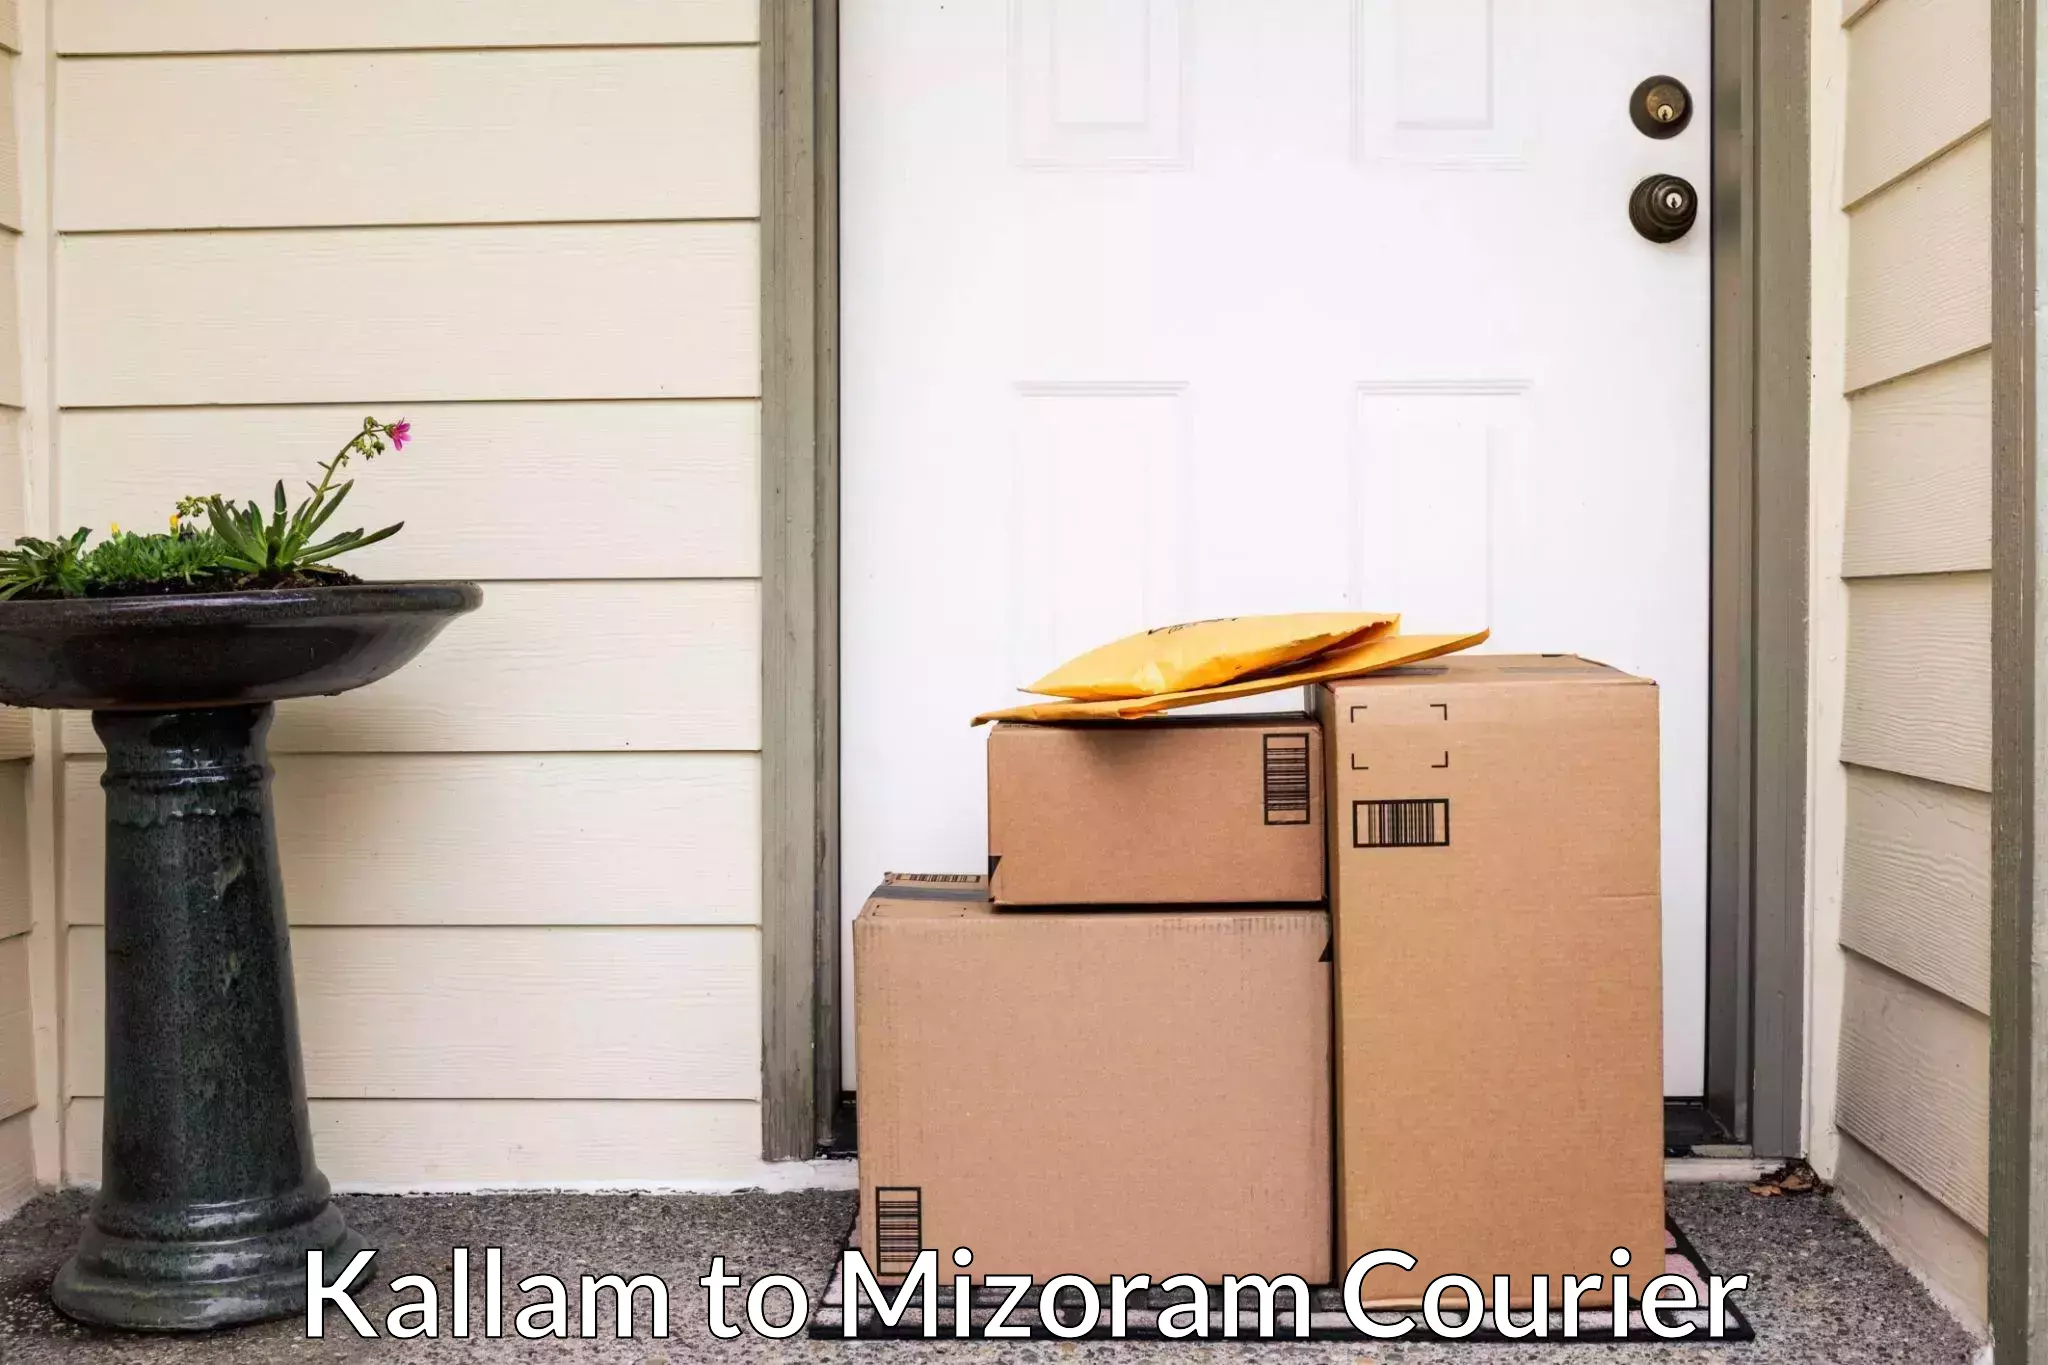 Trusted relocation experts Kallam to Darlawn